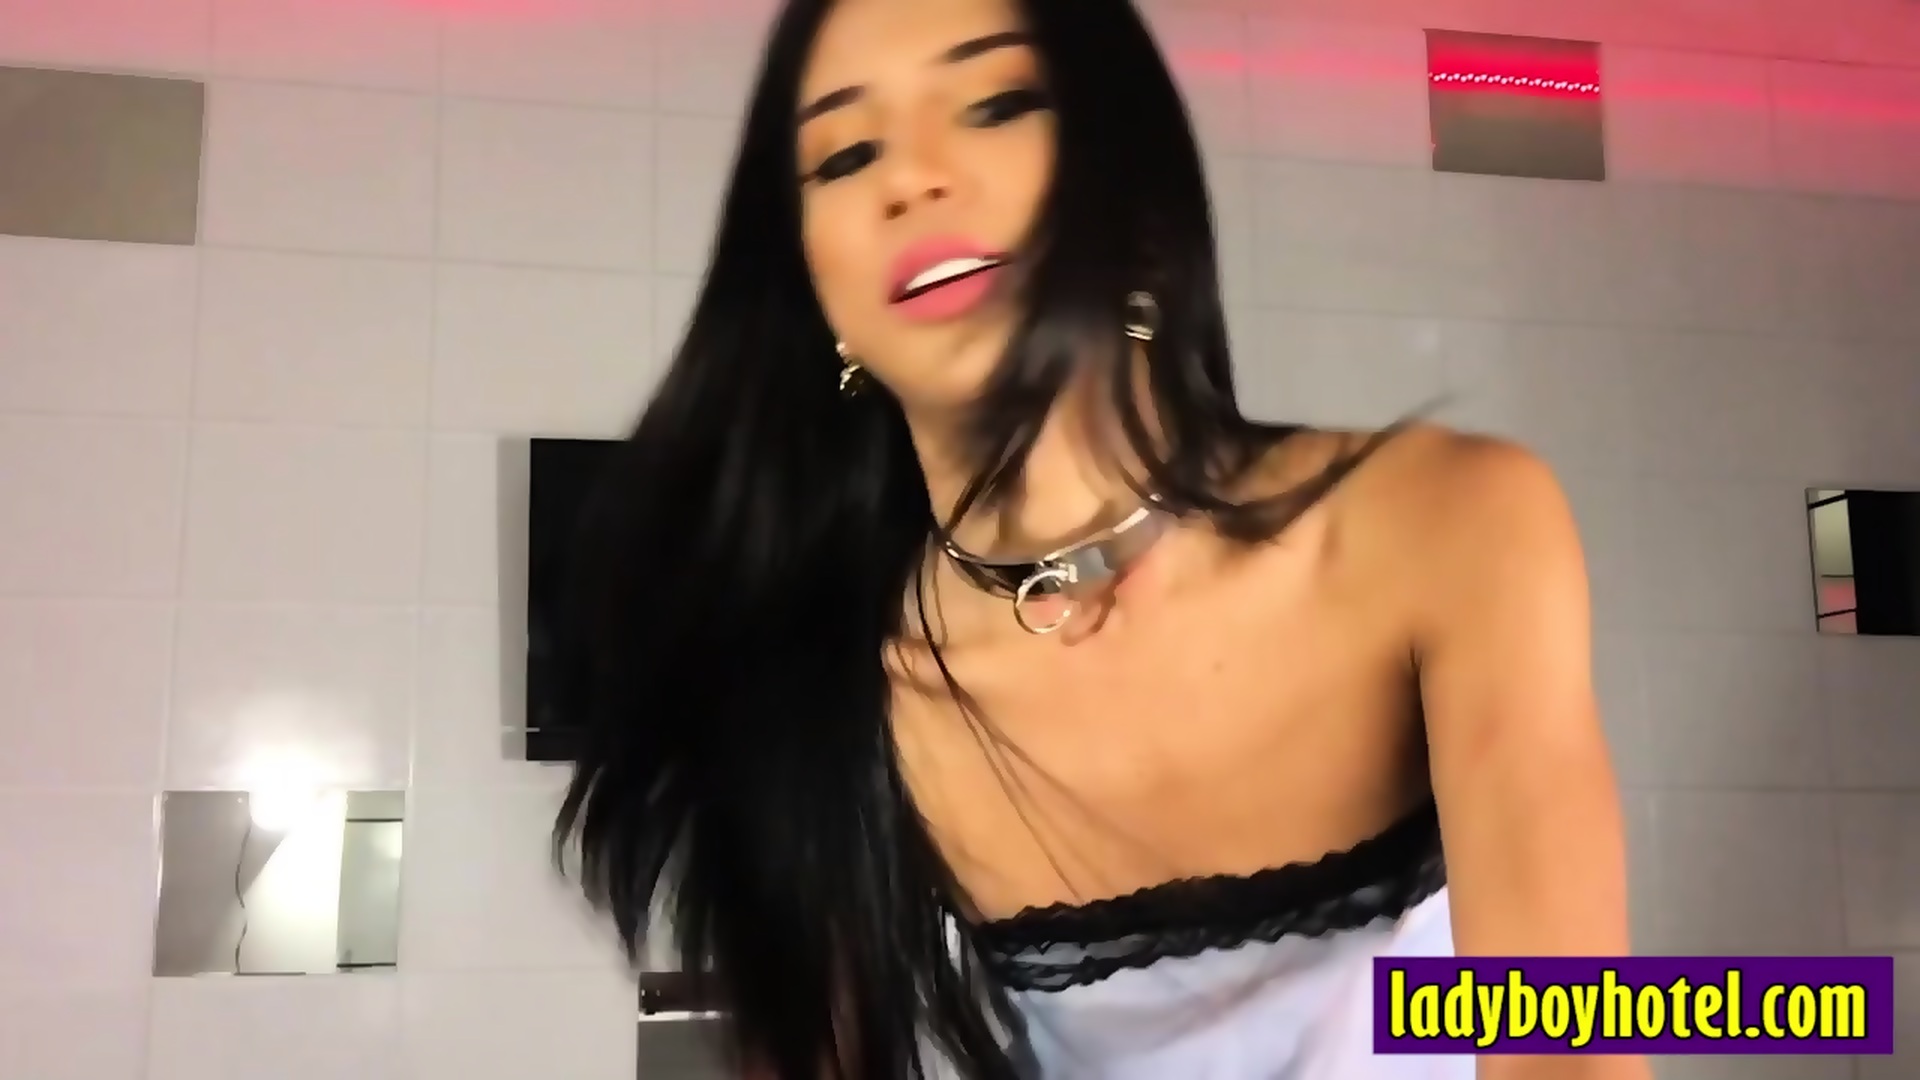 1920px x 1080px - Horny Asian Ladyboy Sunny Likes To Sucking Dick And To Be Fucked In Asshole  - EPORNER